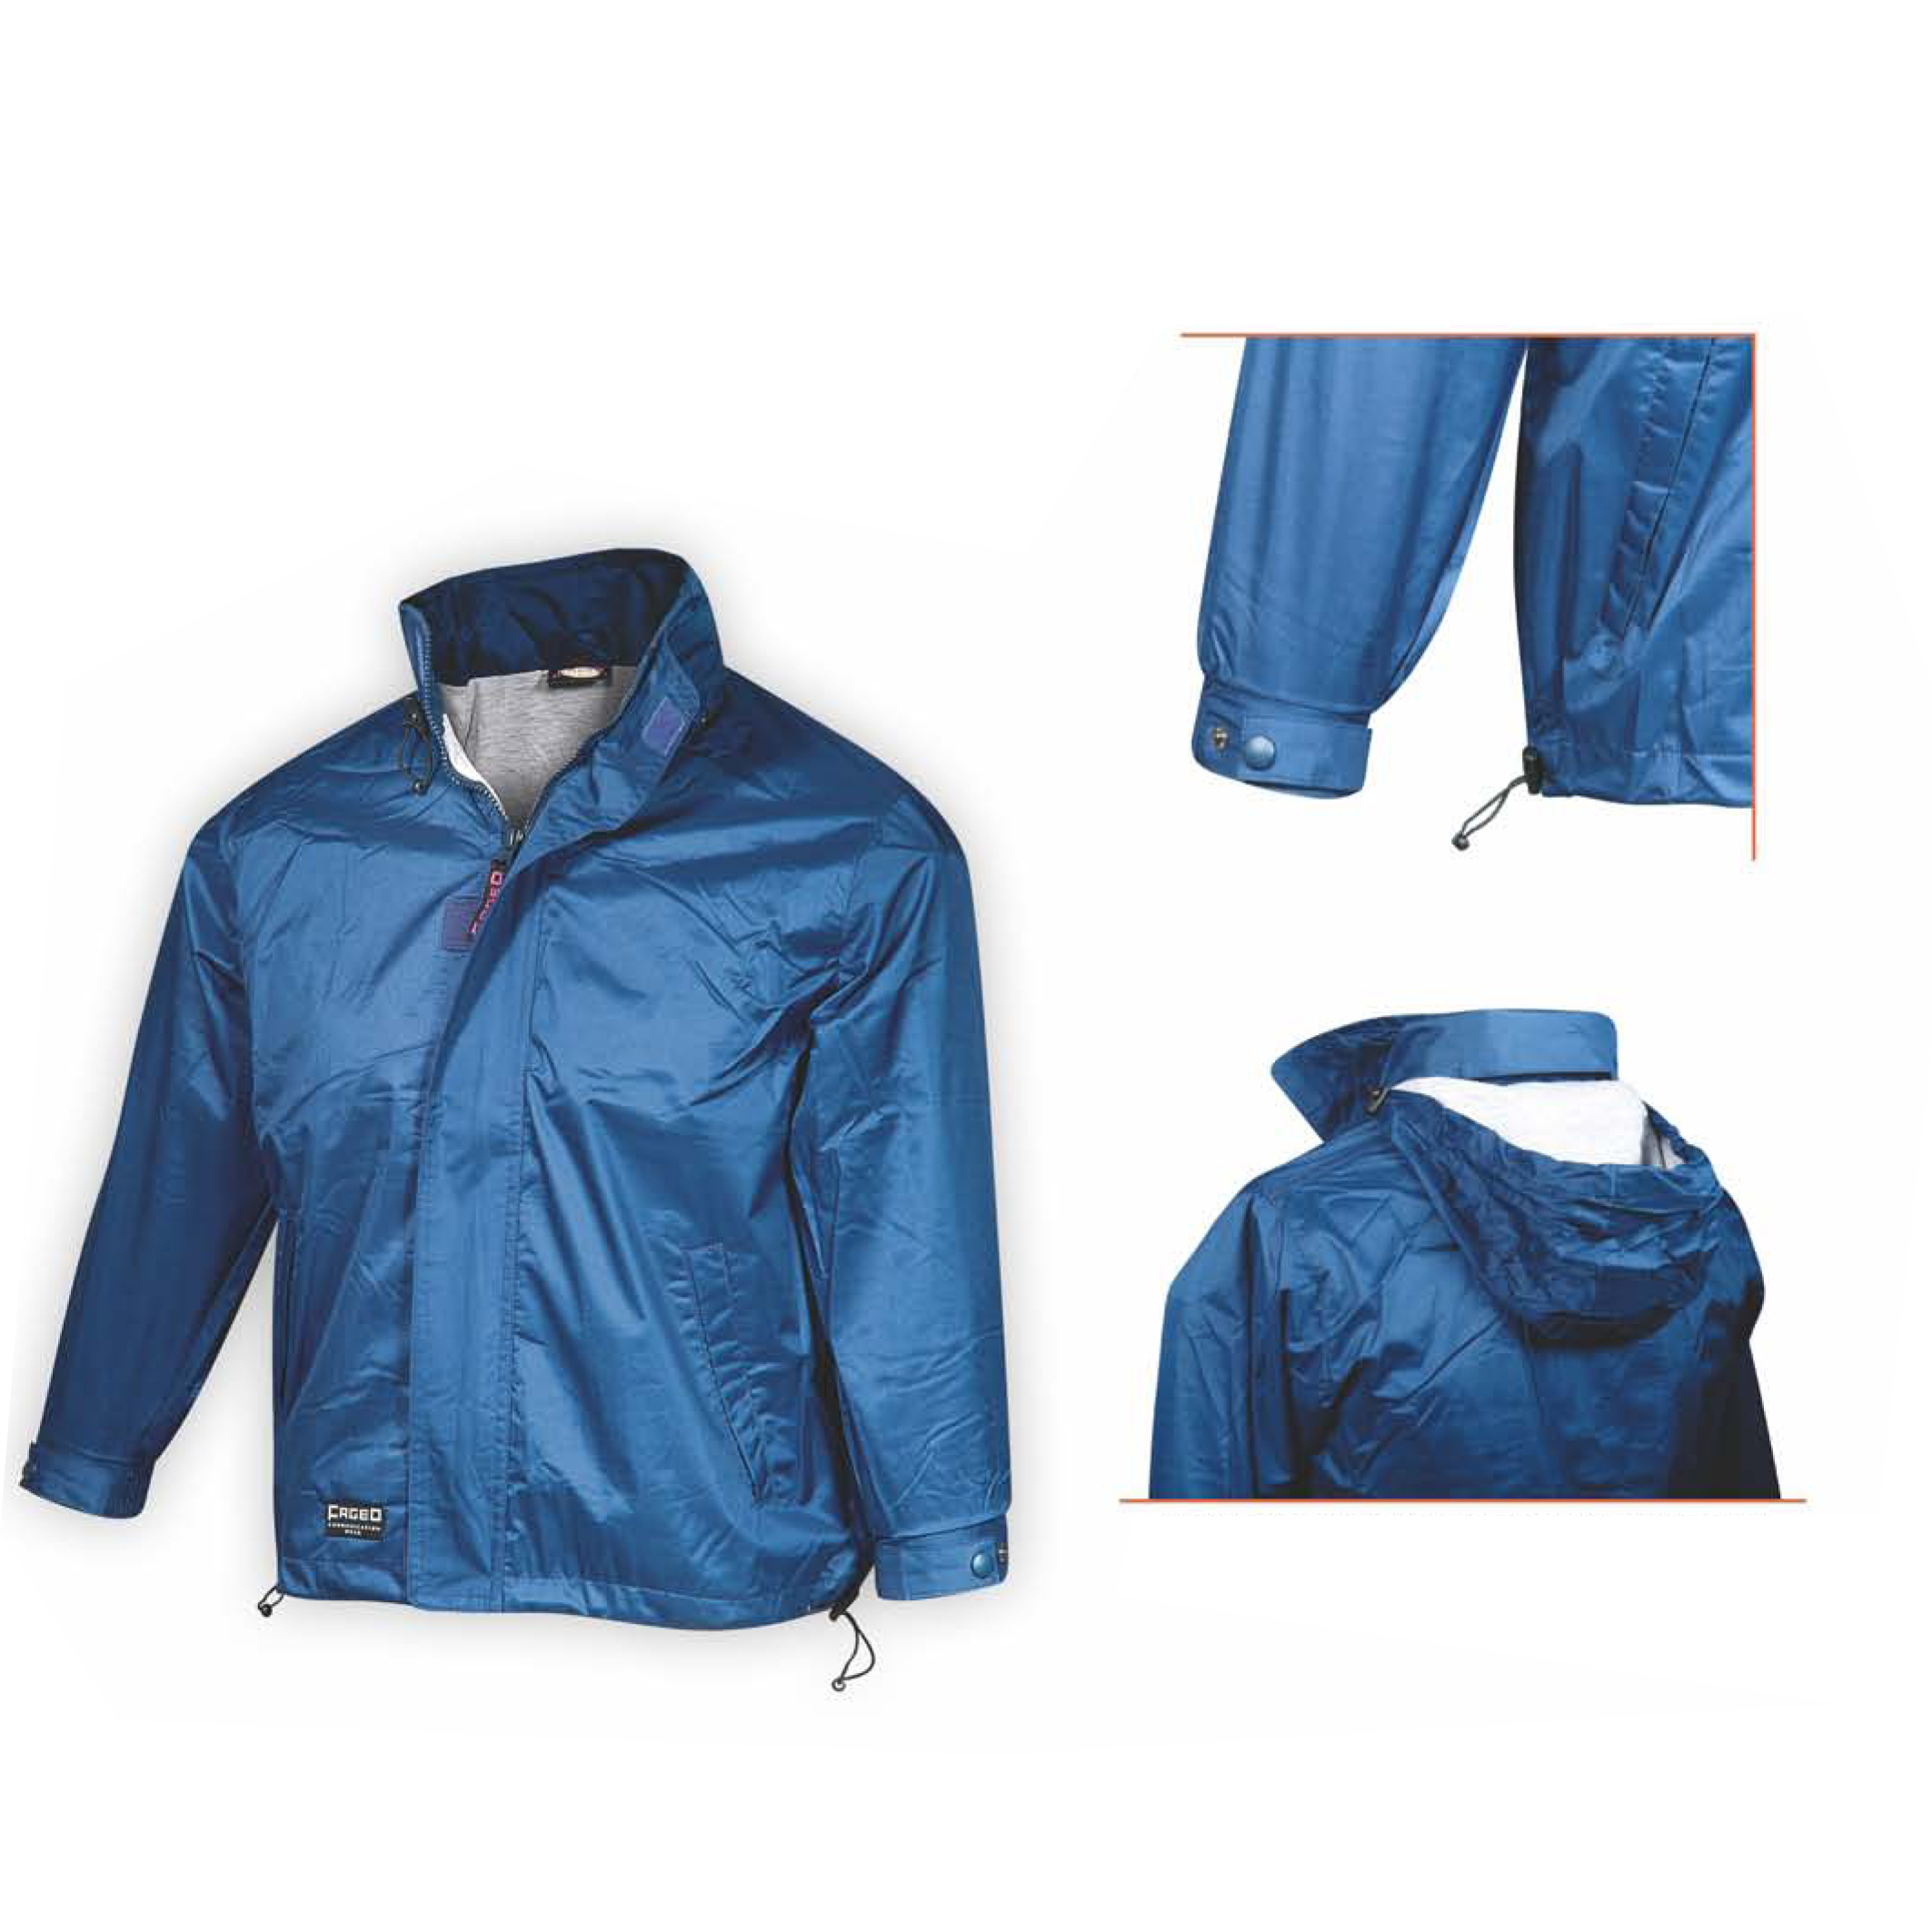 Code:502 YOUTH – Sport jacket wind proof and water proof with hood into colar